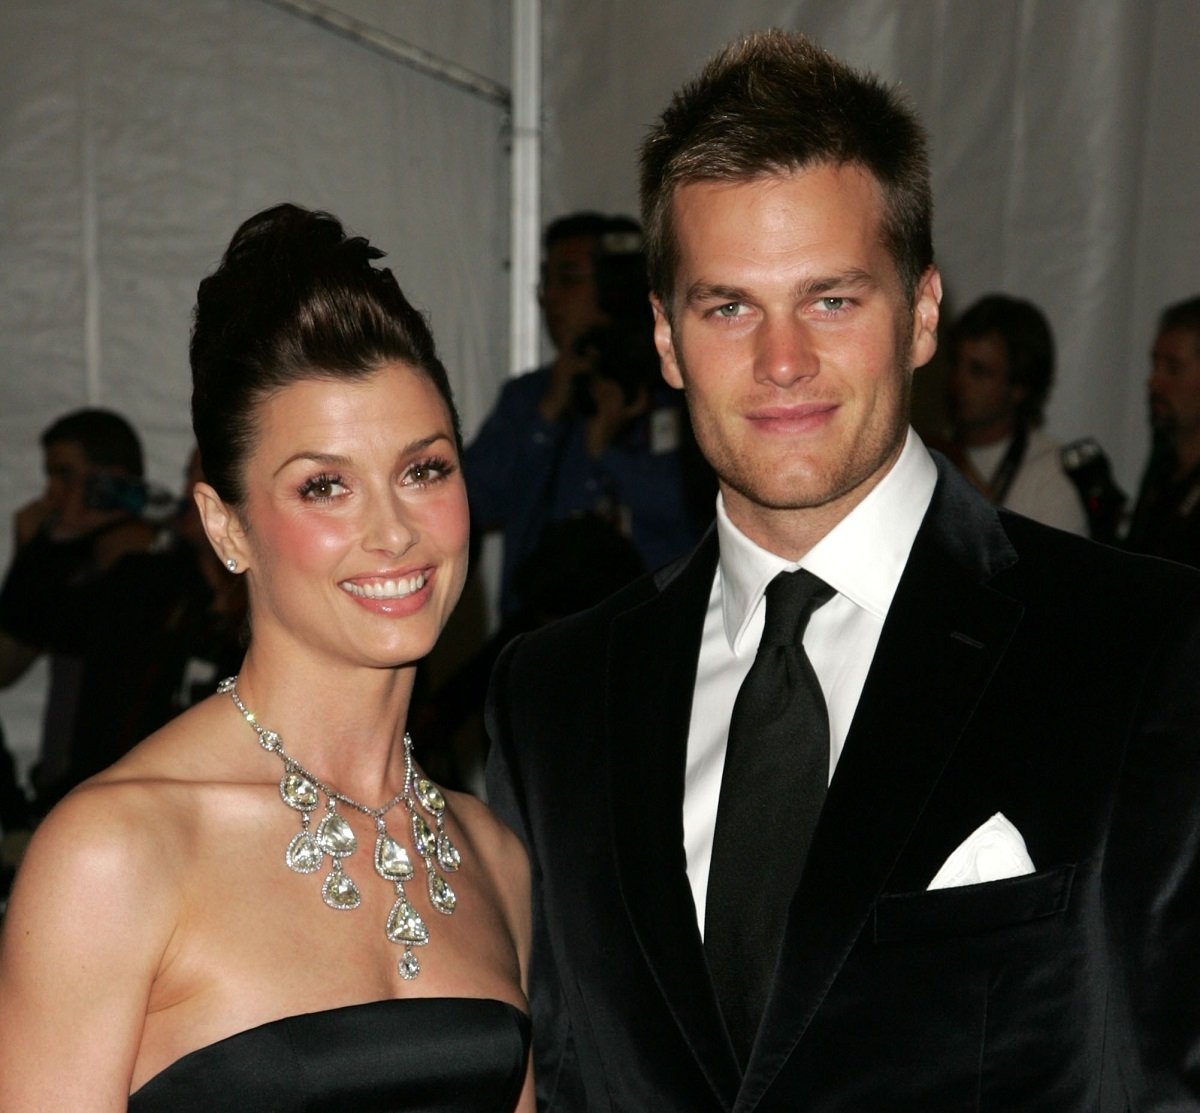 Are Tom Brady and His Ex-Bridget Moynahan on Good Terms Today?